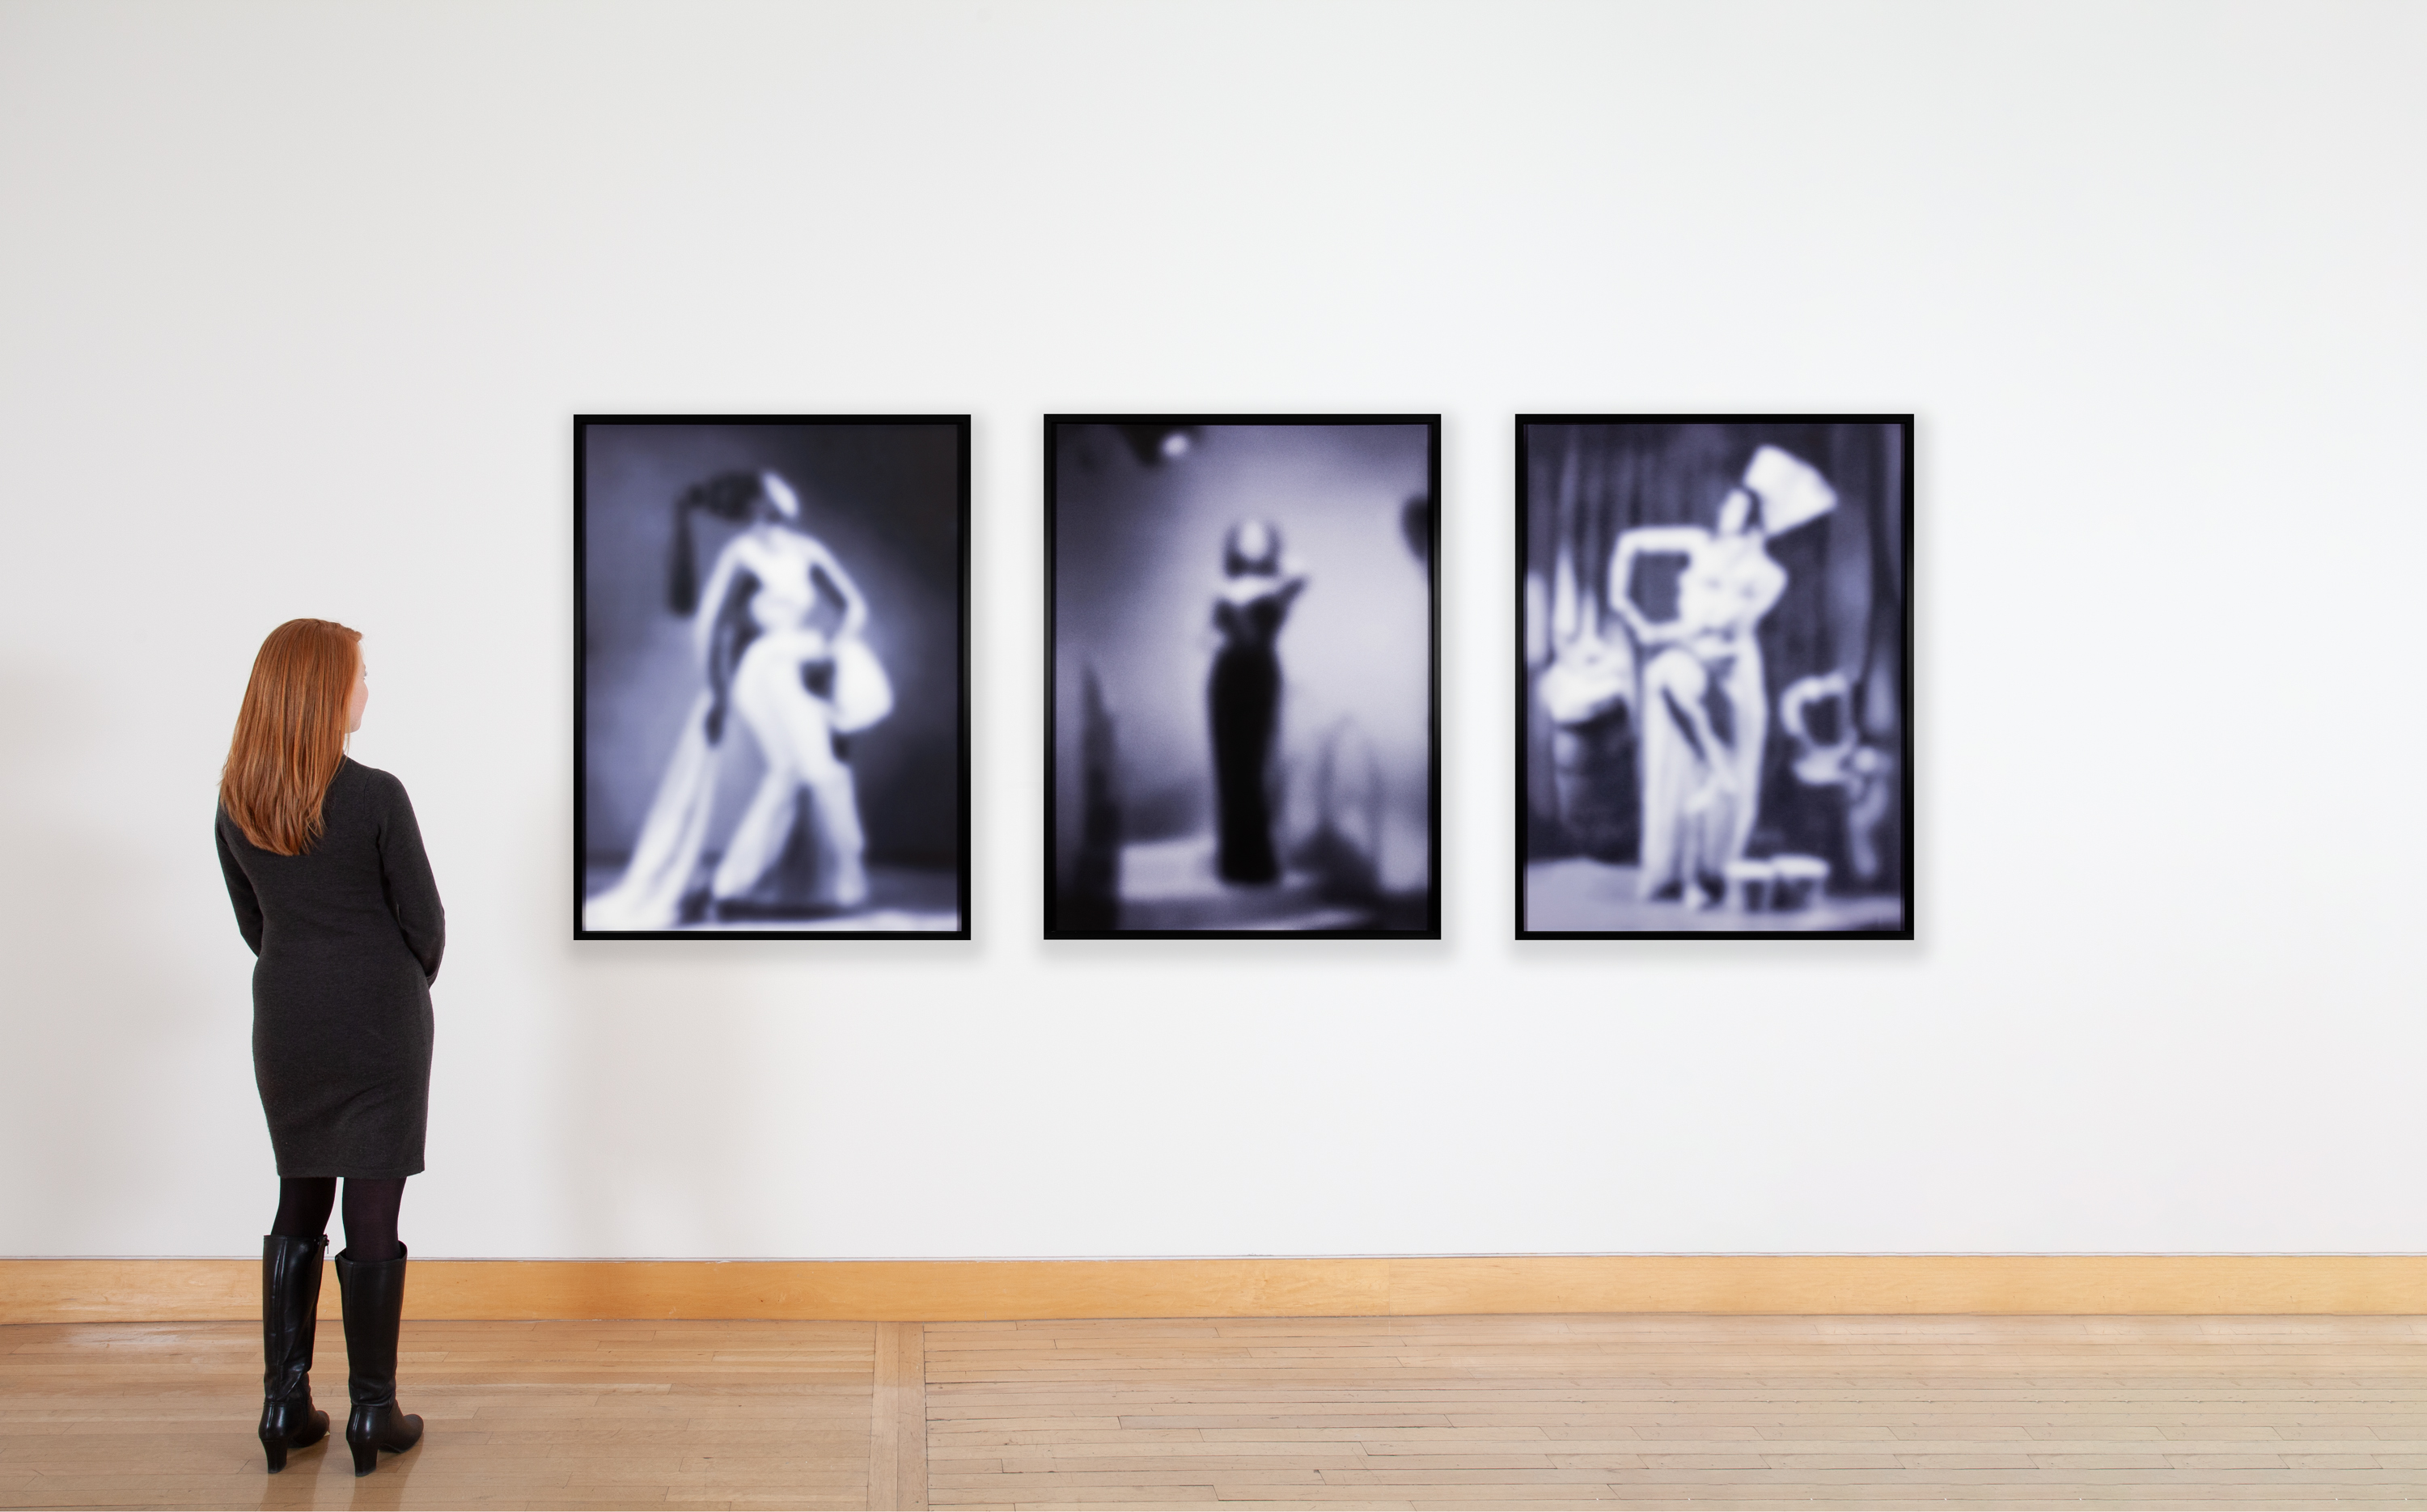 Color image of a figure looking at a triptych depicting three purple toned photographs of three performers out of focus framed in black on a white wall